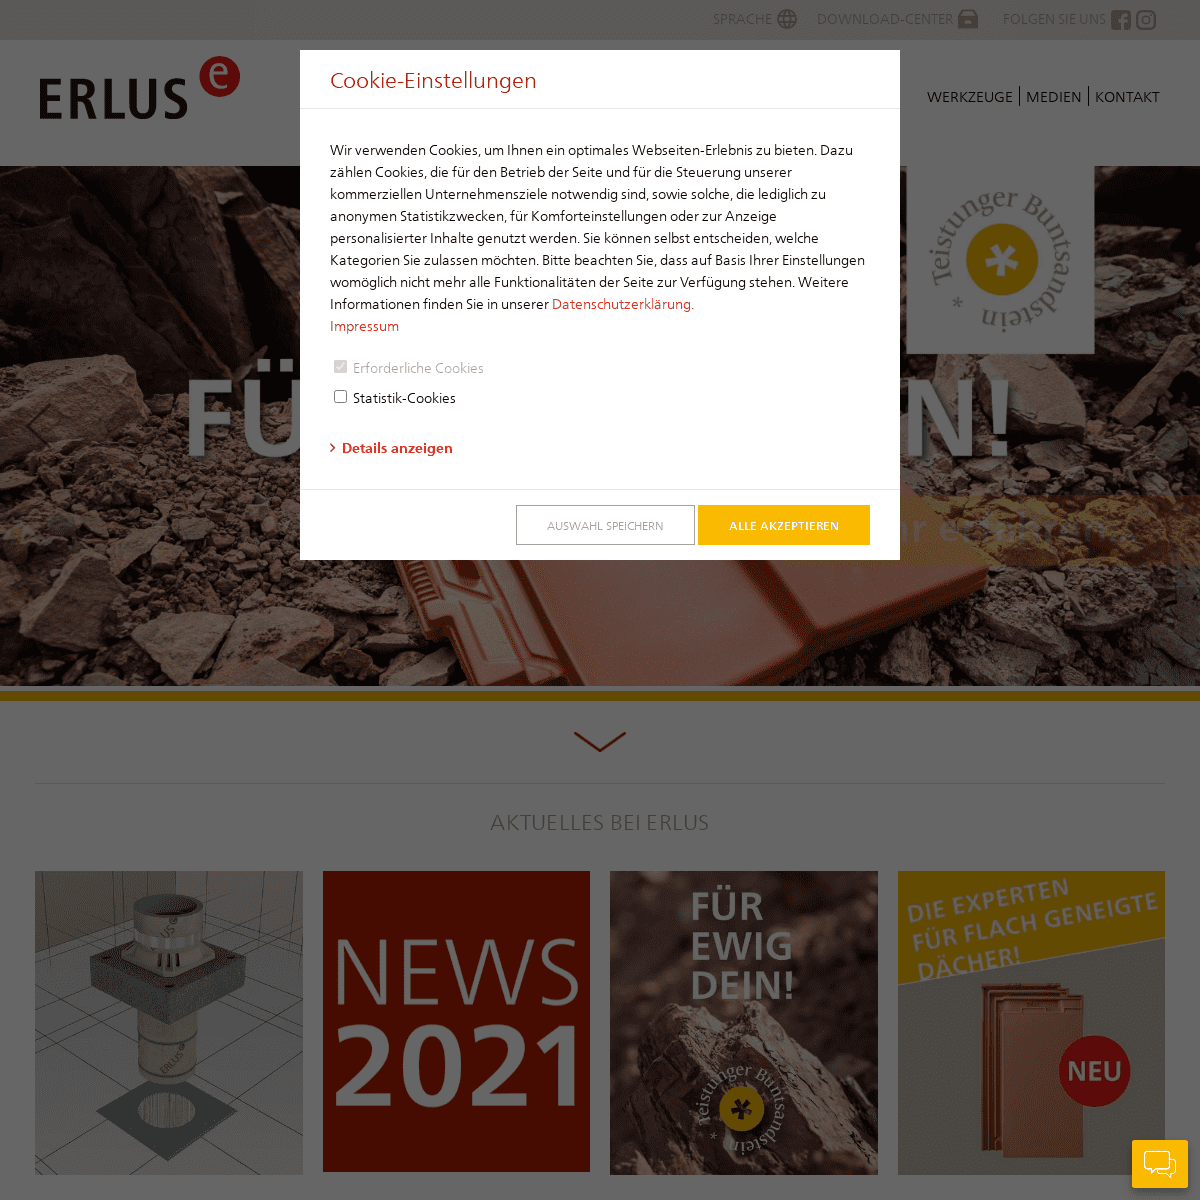 A complete backup of https://erlus.com